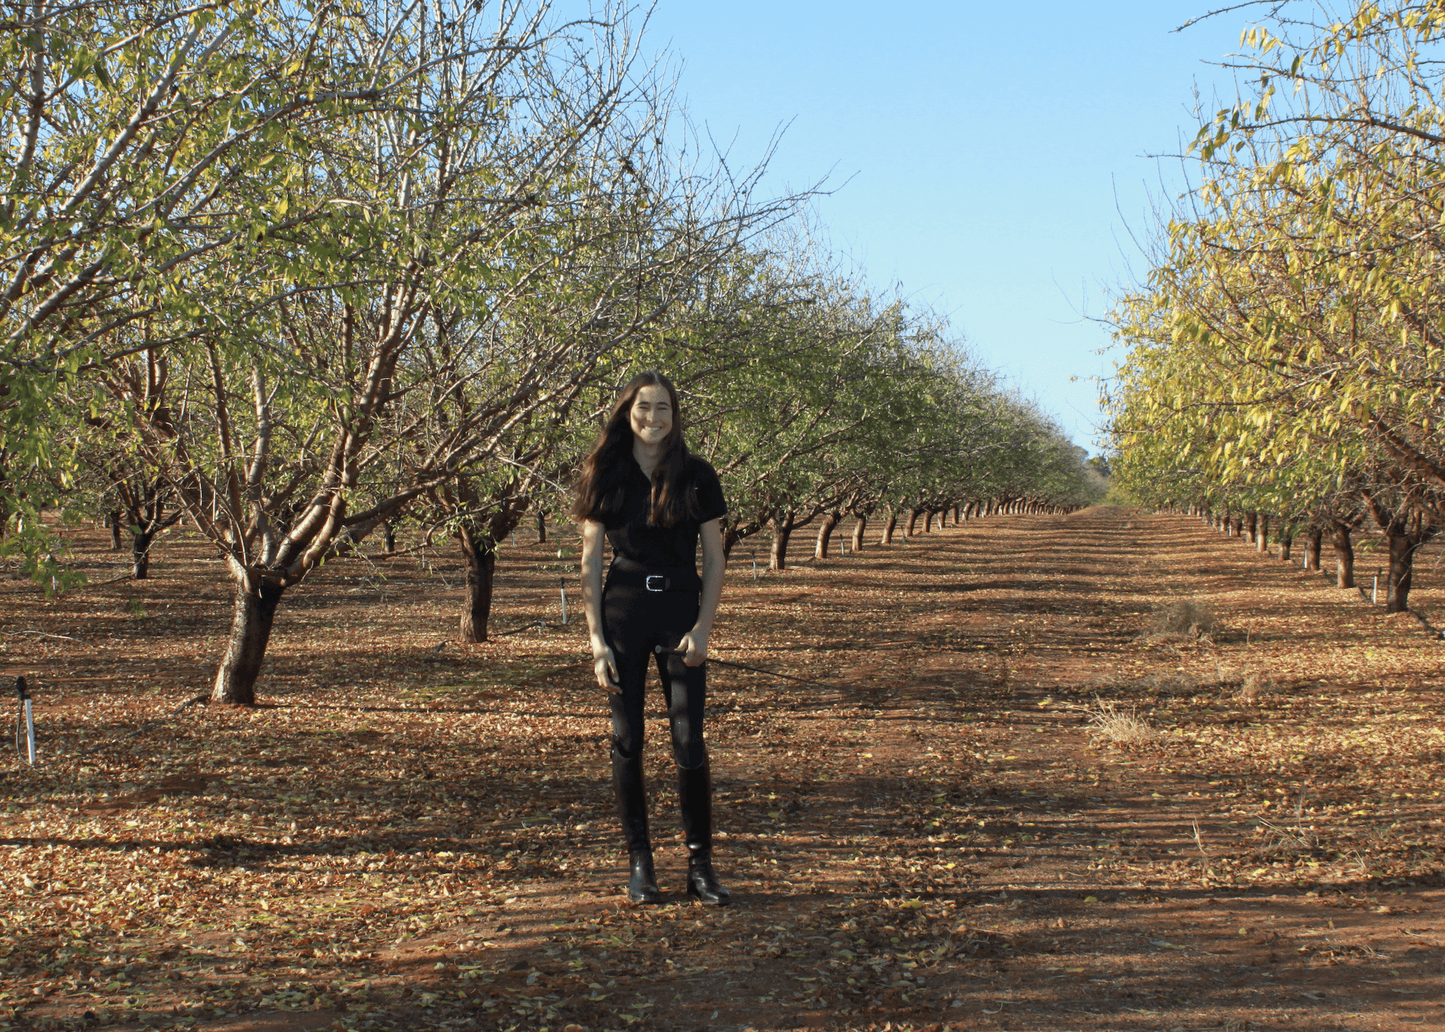 Woman in black horse riding tights standing in a tree-lined orchard.